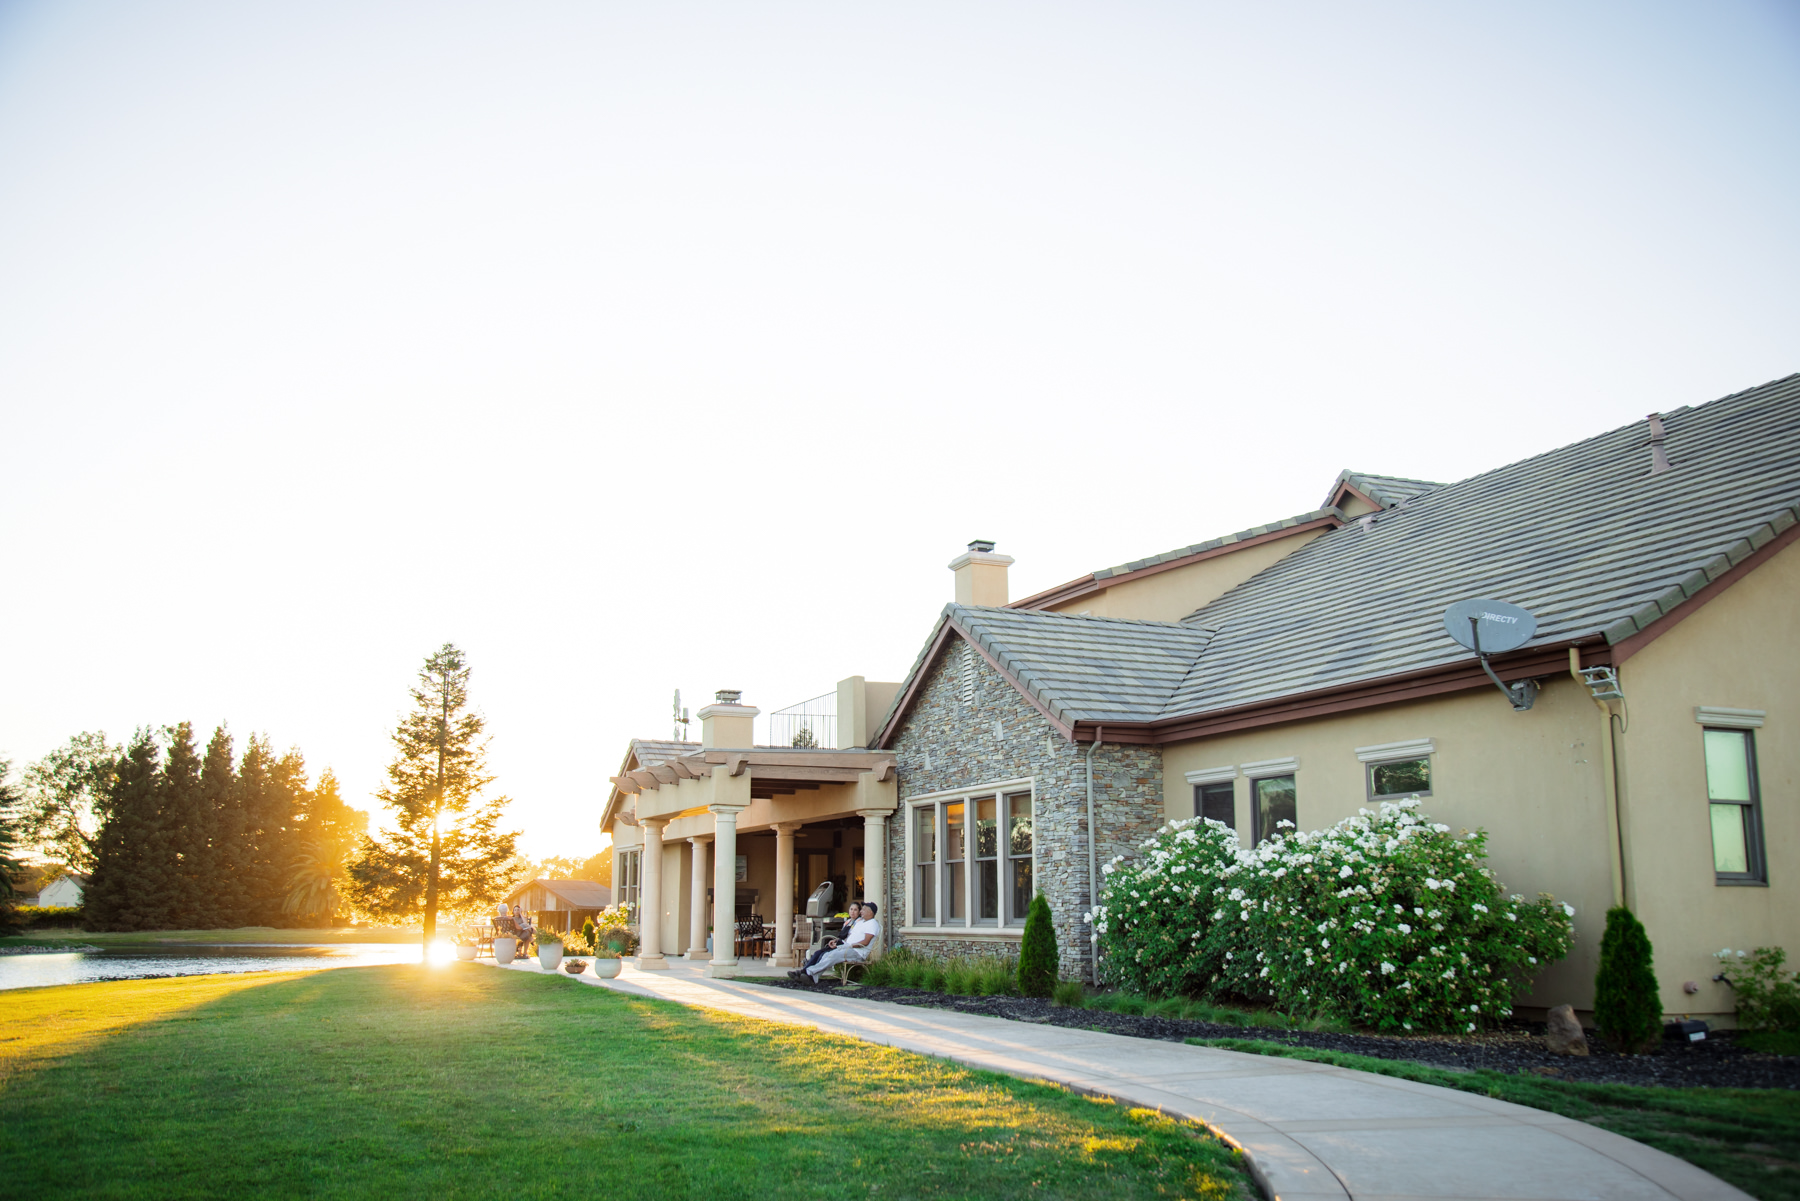 Sprawling grounds at Lakeview estate and winery in Sacramento California, a new wedding venue